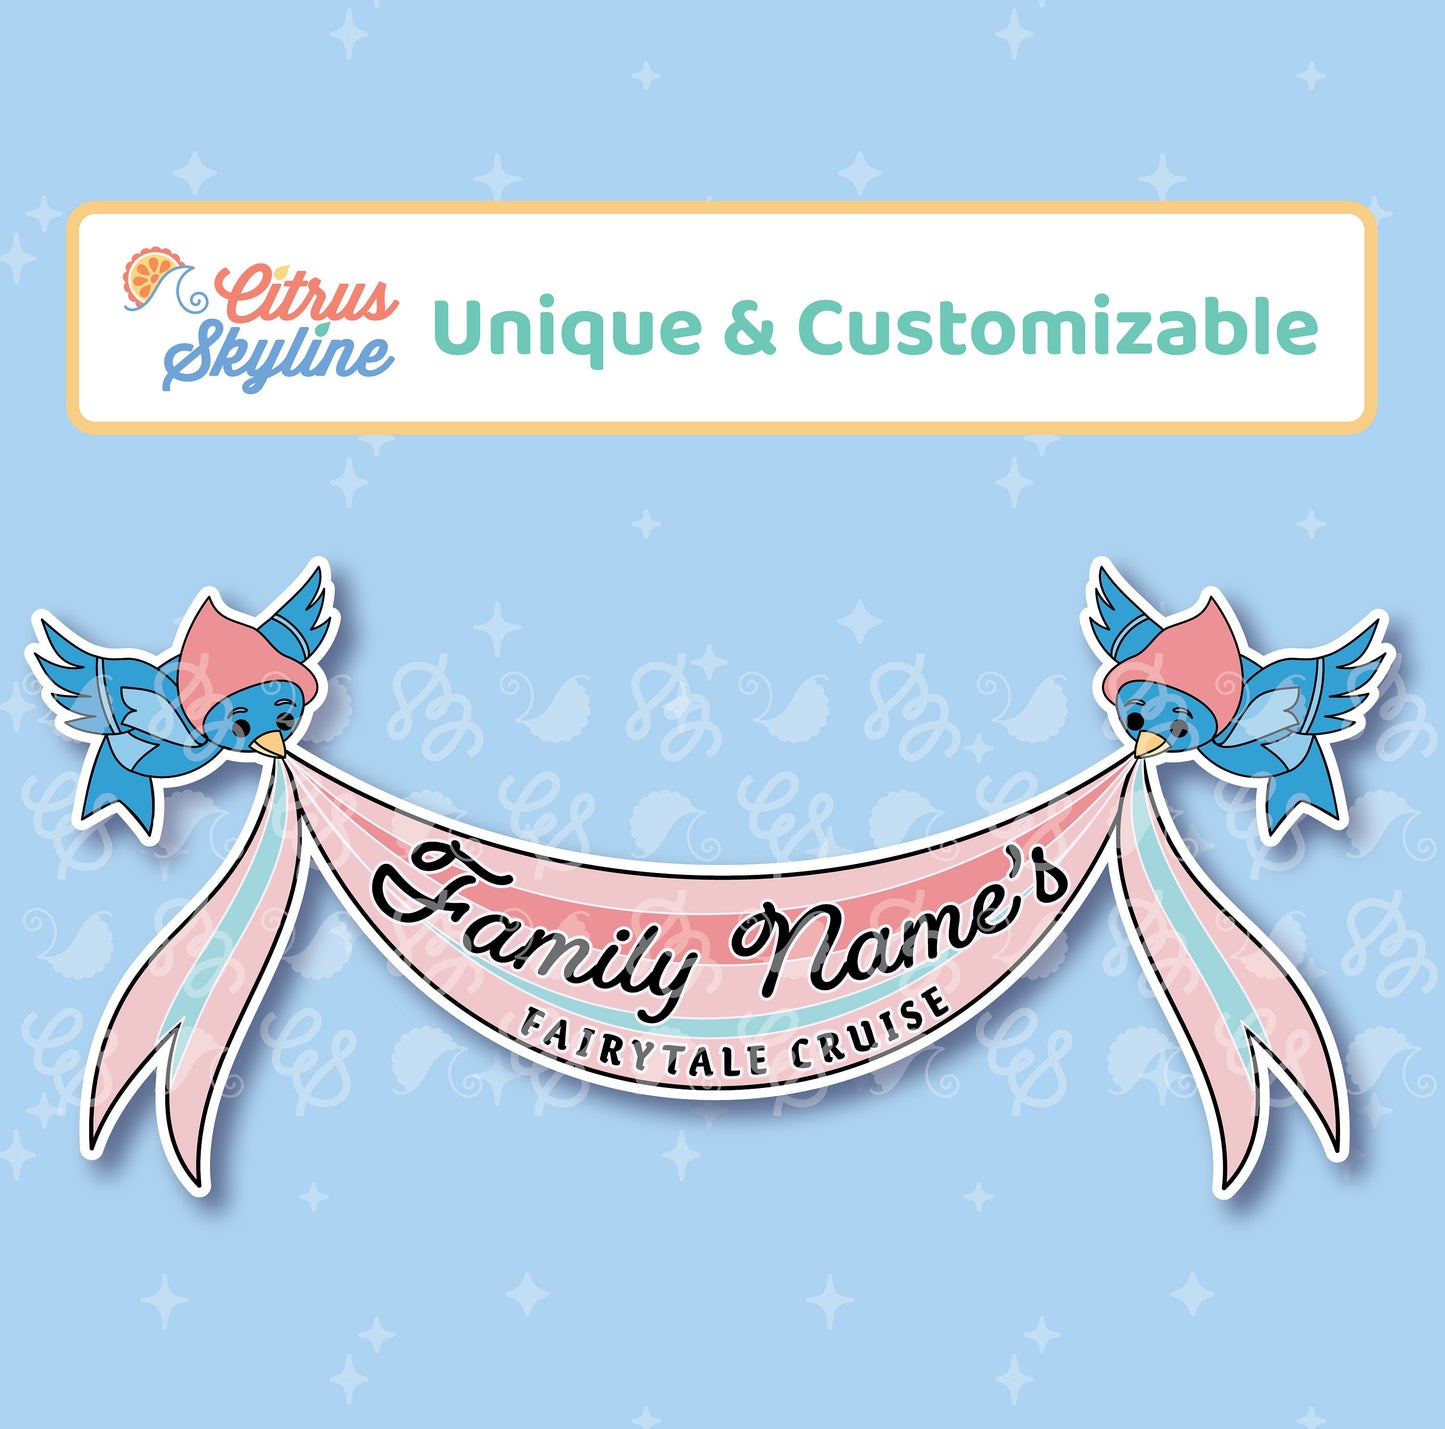 Cinderella Cruise Magnet Theme for Happy Celebrations Includes Castle, Custom Name Magnets, Family Happily Ever After, Pumpkin Carriage